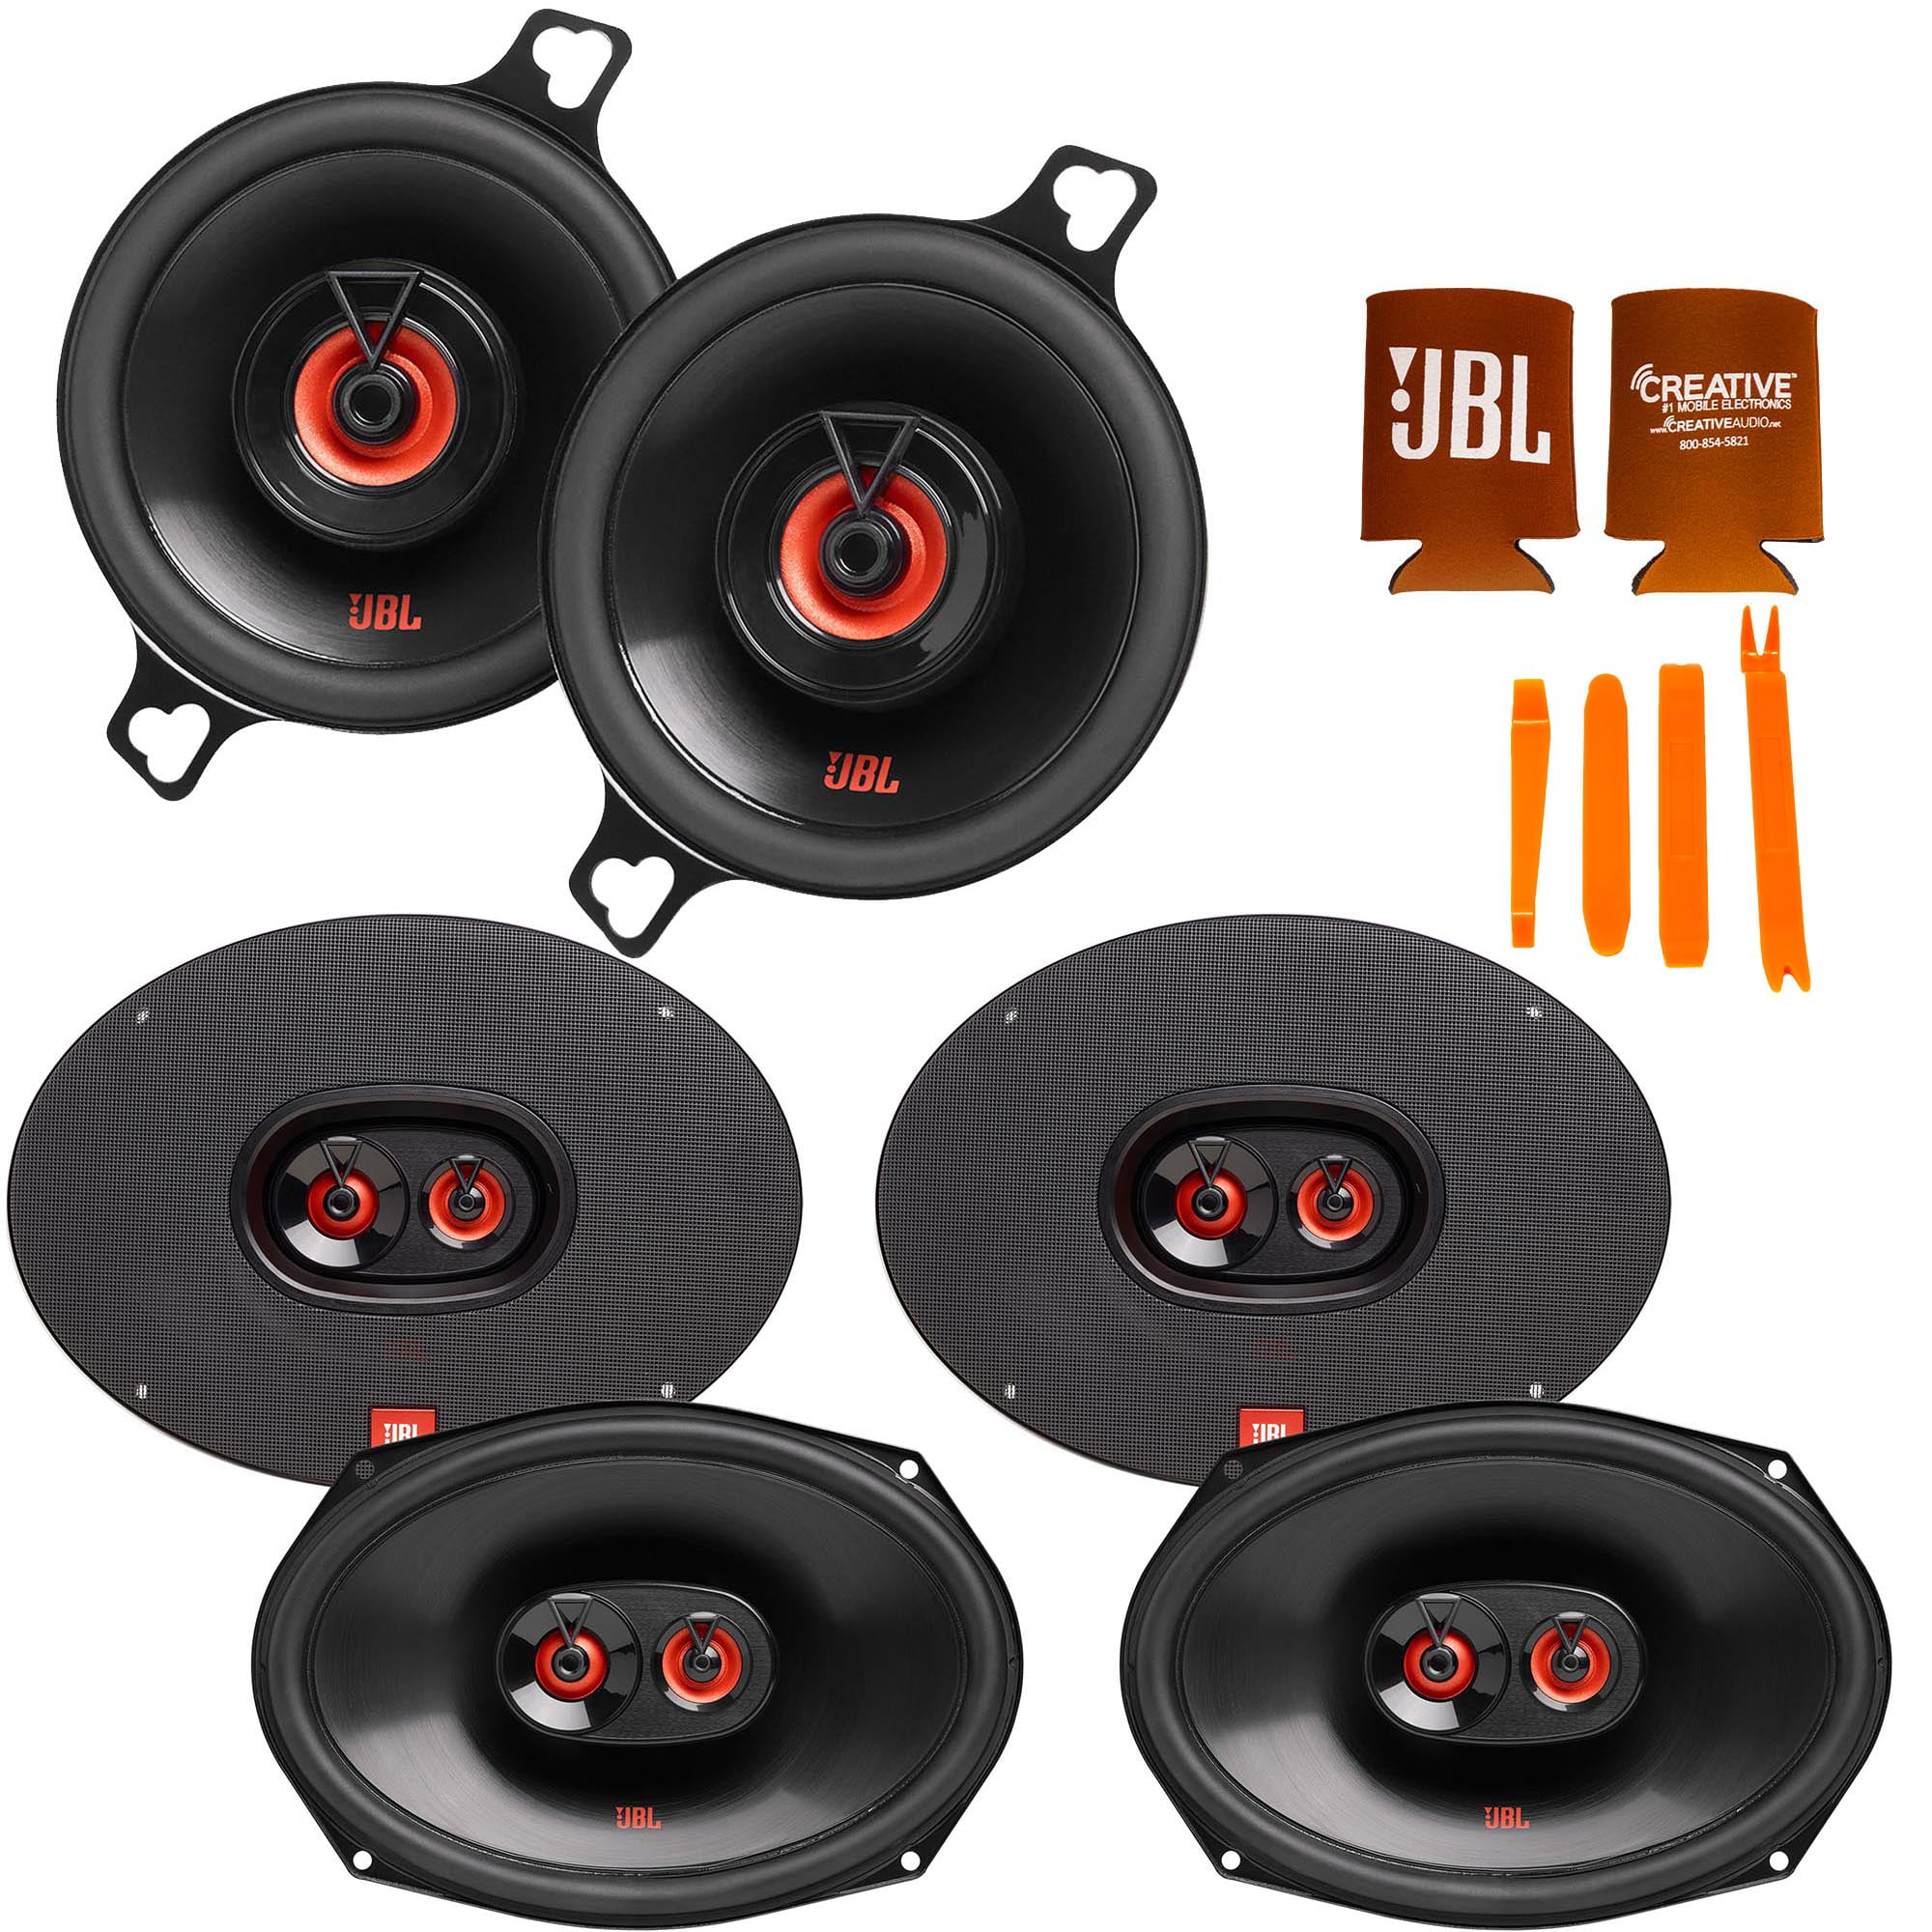 Kassér Mindre end Forkert JBL Compatible With Dodge Ram 09-20 - 2-Pairs of CLUB-9632AM 6x9" Three Way  Speakers And a pair of CLUB-322FAM 3.5" Coax Speakers - Walmart.com